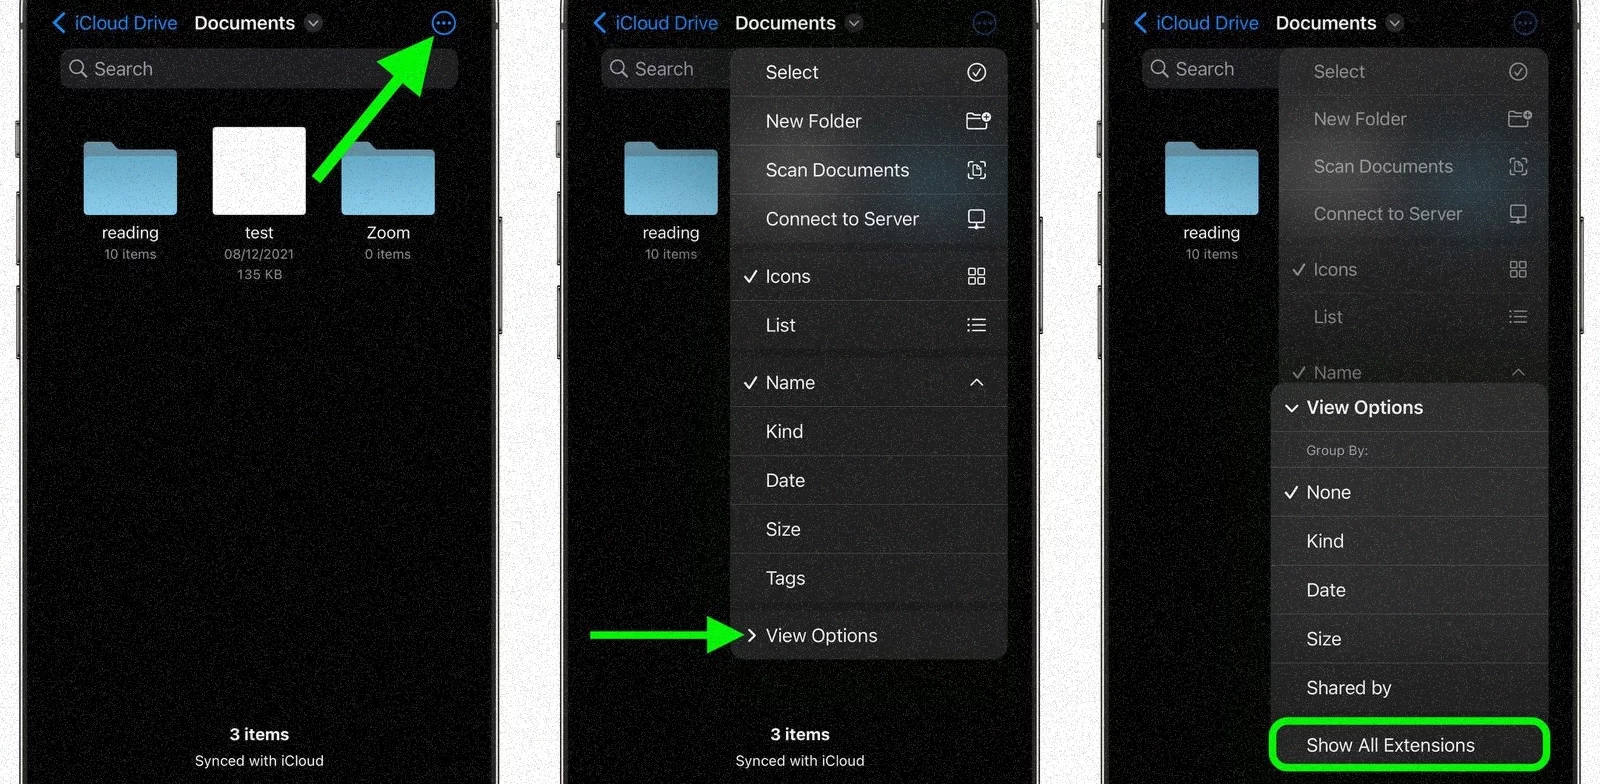 enable file extensions in Files app on iPhone